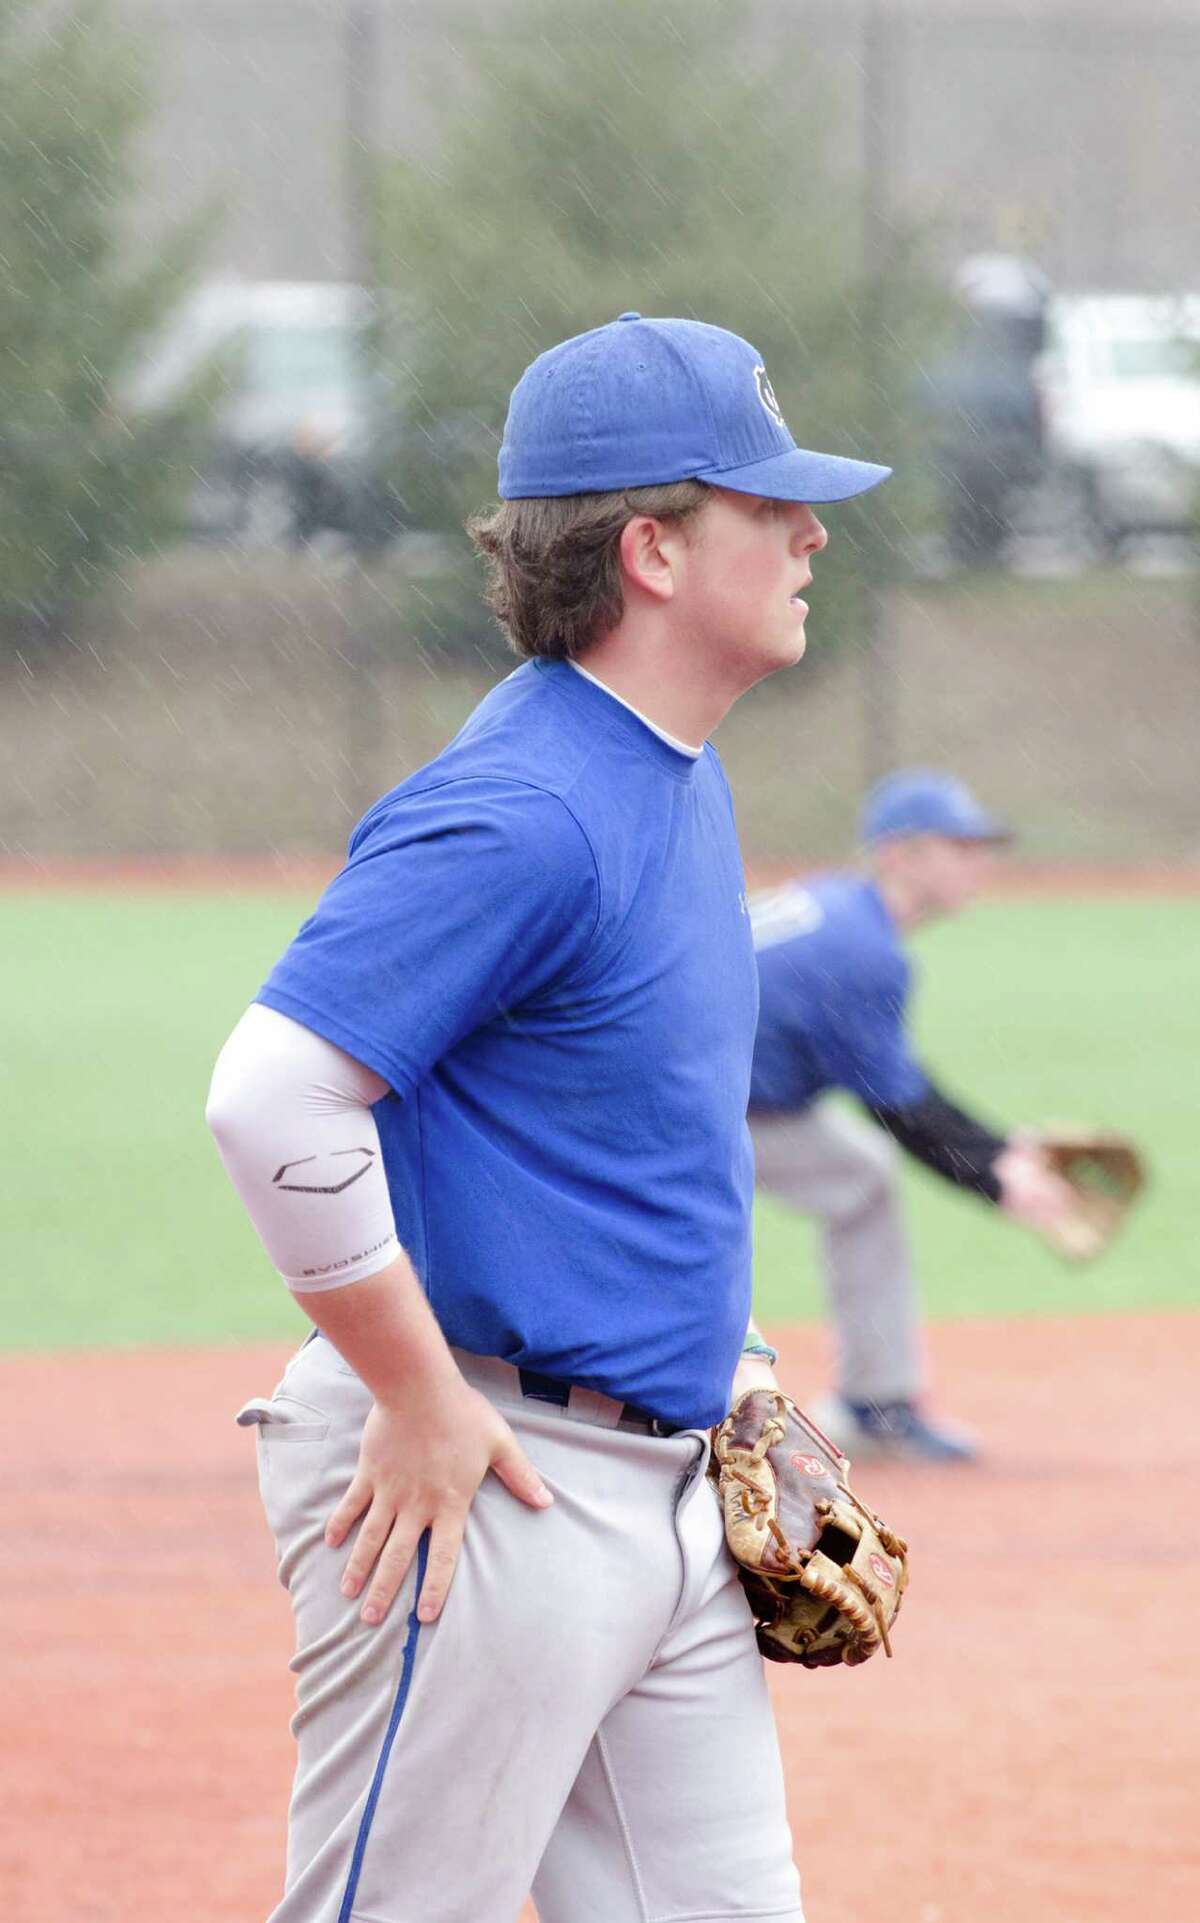 Darien's Andrew Maley on third base during the baseball scrimmage at Darien High School on Monday, Apr. 1, 2013.